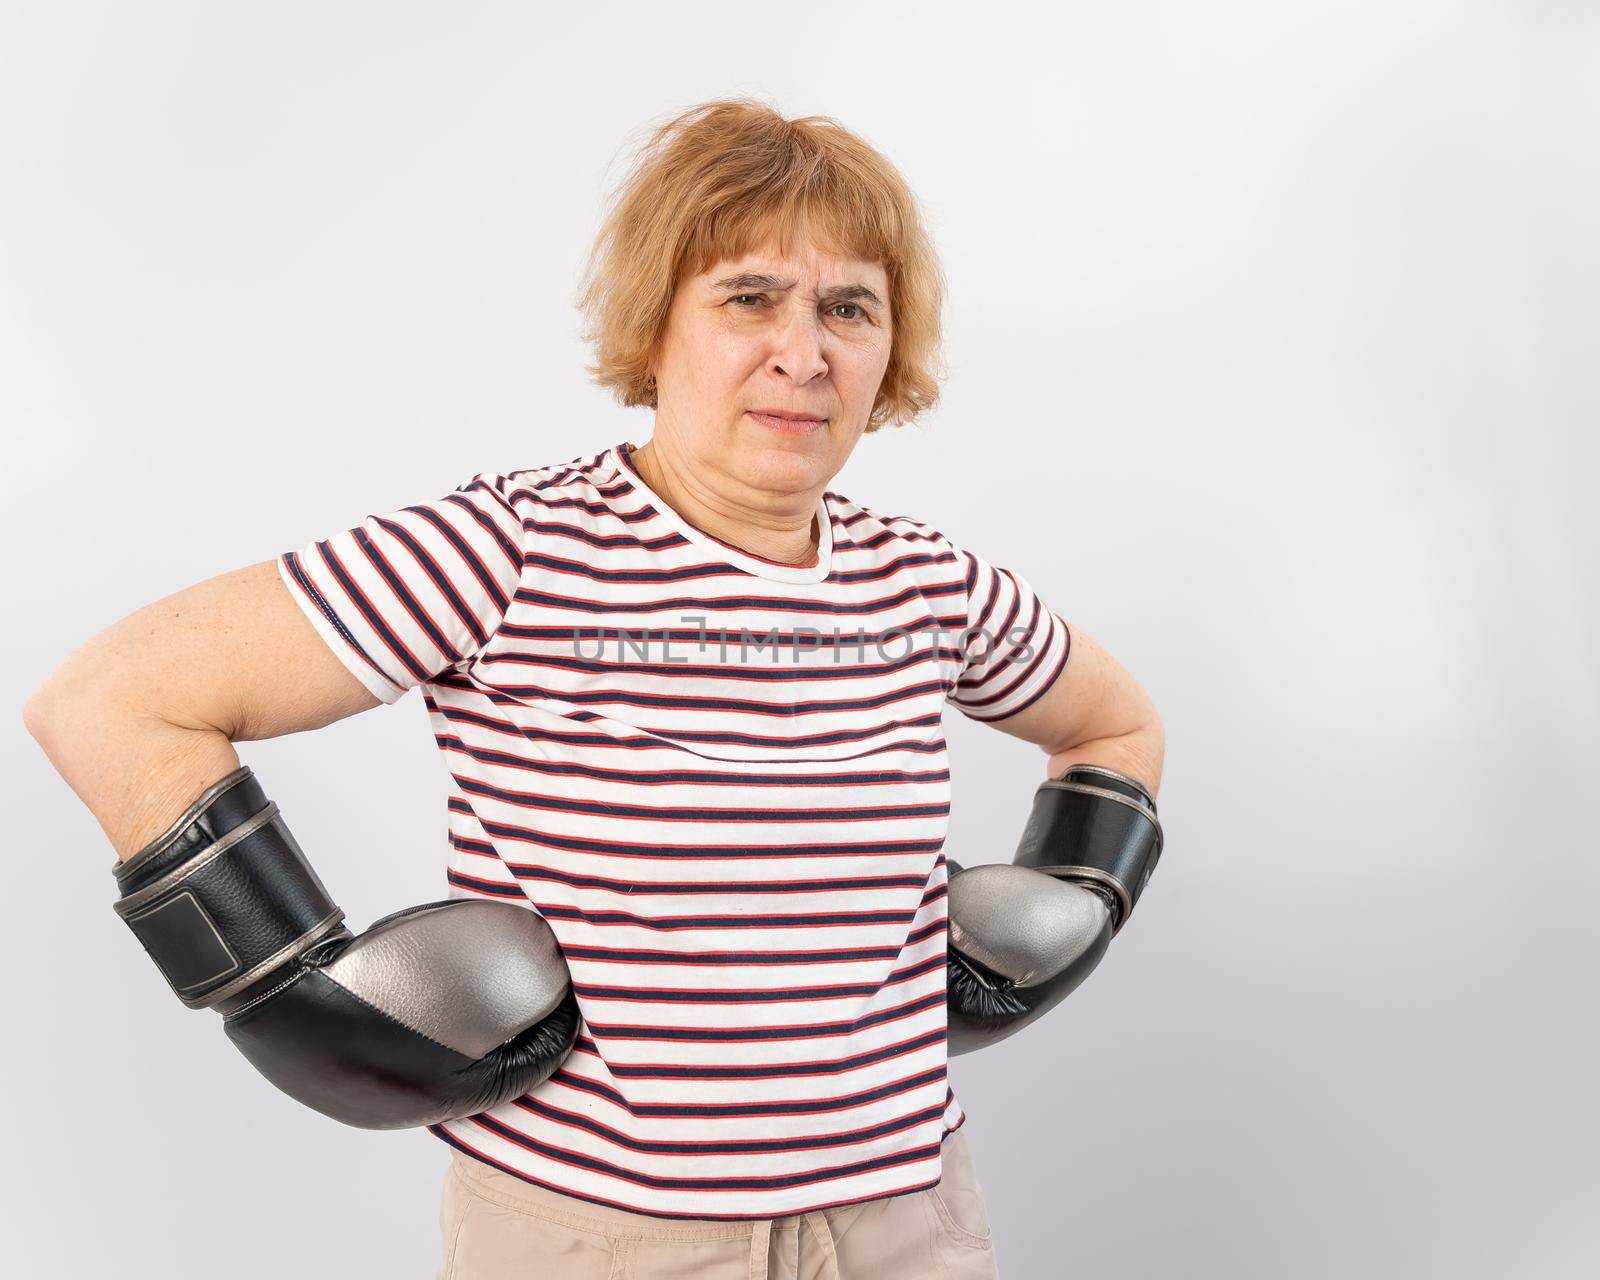 Elderly woman in fighting gloves in a defensive pose on a white background. by mrwed54